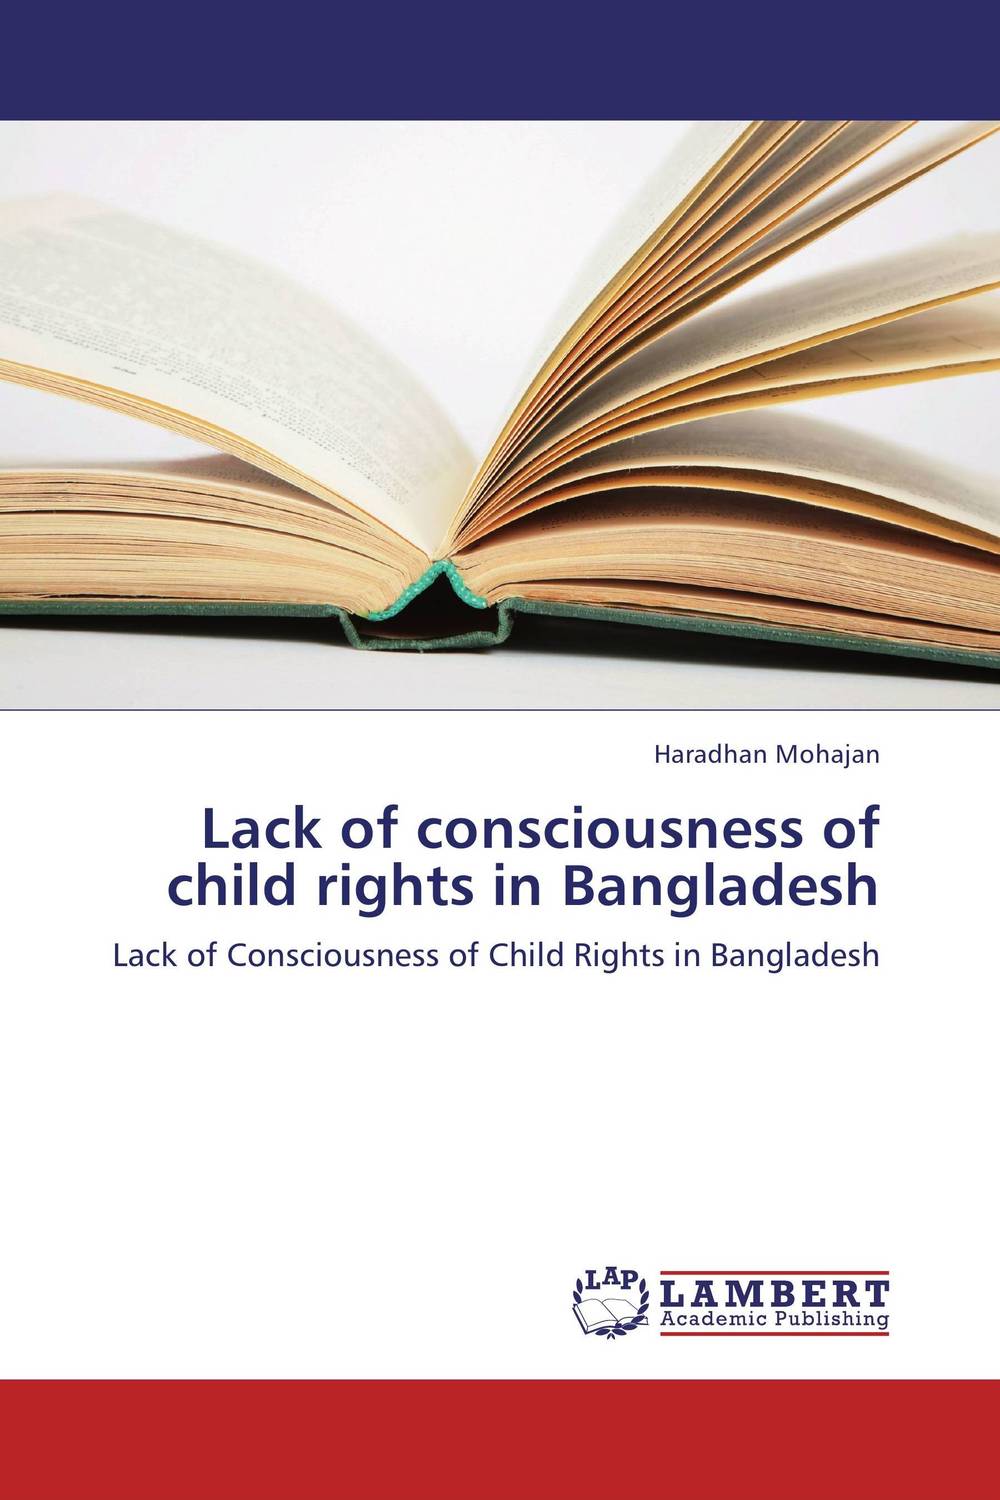 Lack of consciousness of child rights in Bangladesh